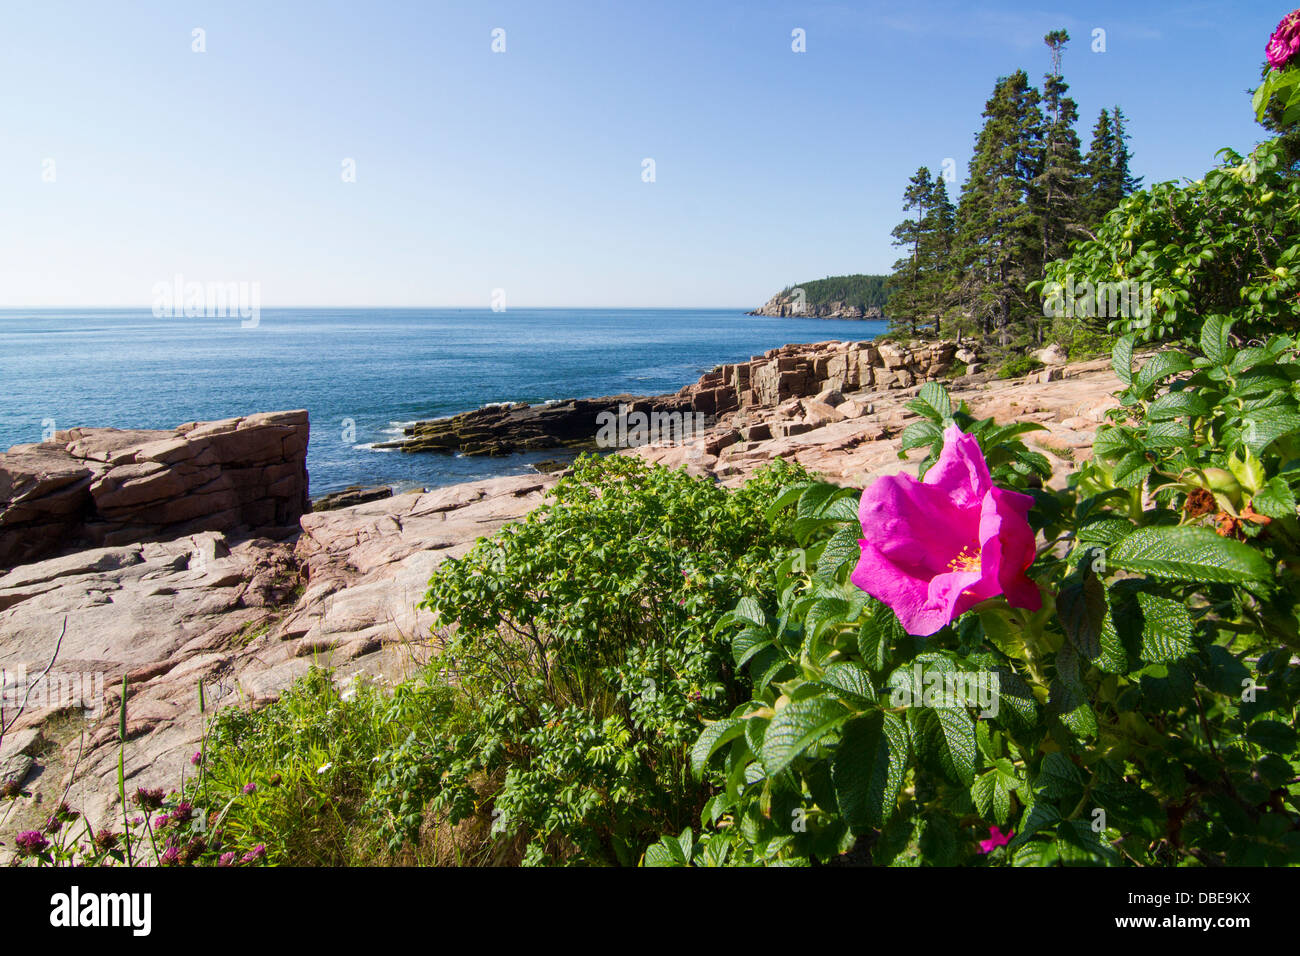 Marine landscape and wild roses in Acadia, Park Loop Road, Acadia National Park, Maine Stock Photo